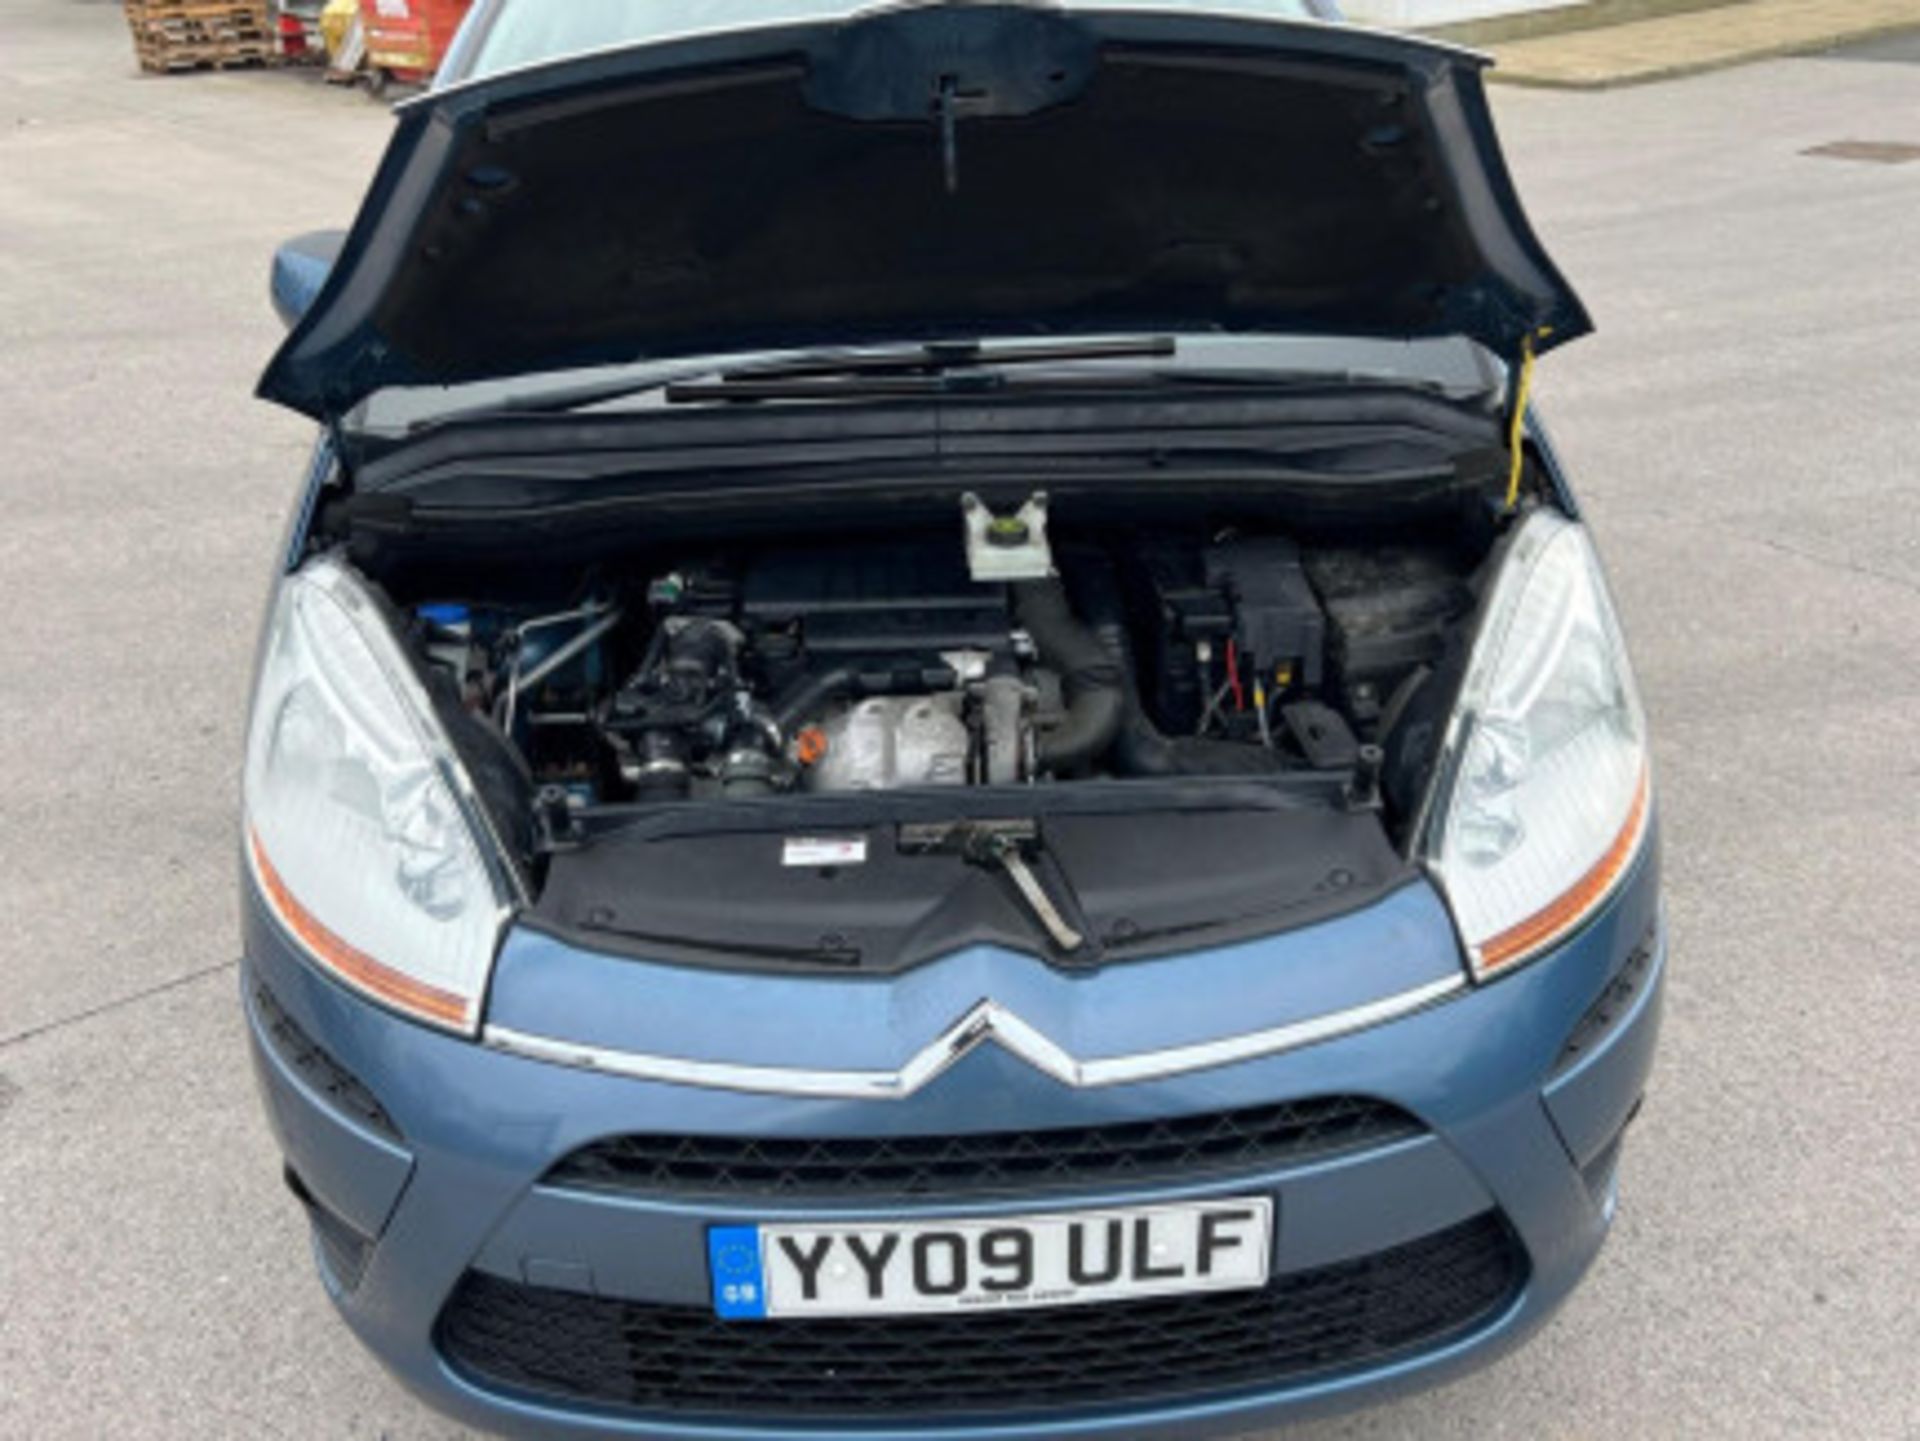 2009 CITROEN C4 PICASSO 1.6 HDI VTR+ EGS6 5DR >>--NO VAT ON HAMMER--<< - Image 60 of 123